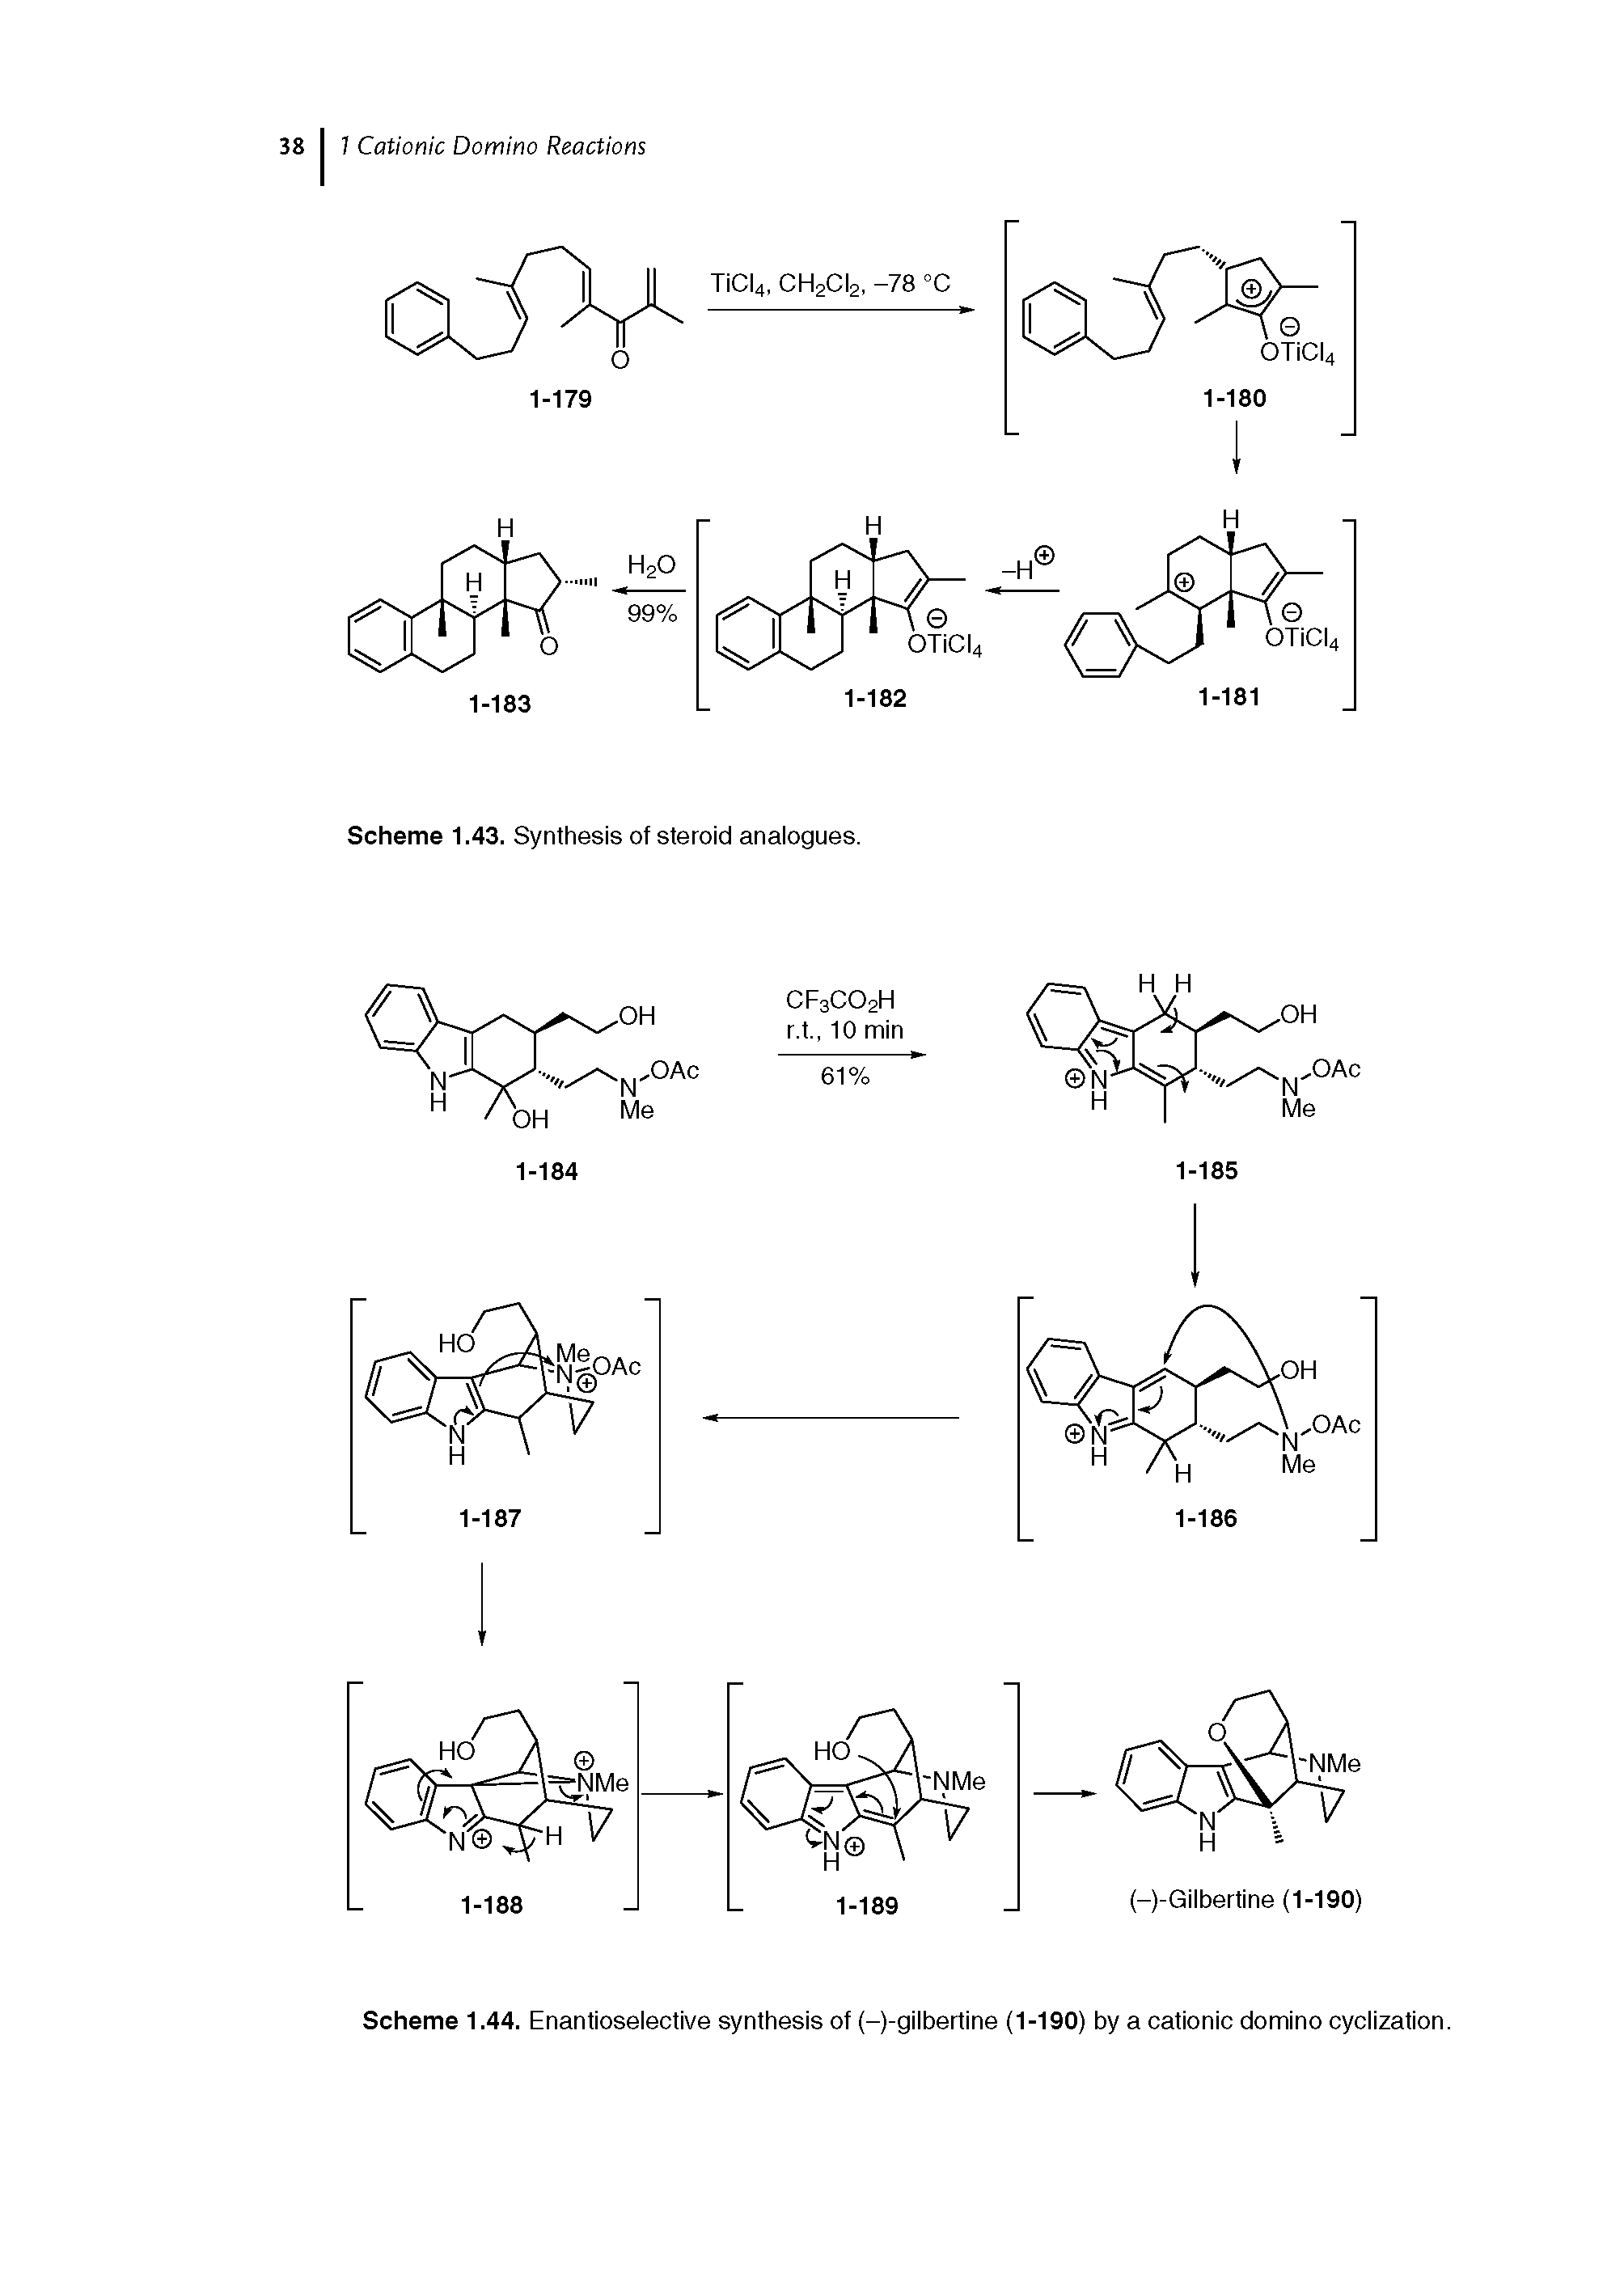 Scheme 1.44. Enantioselective synthesis of (-)-gilbertine (1-190) by a cationic domino cyclization.